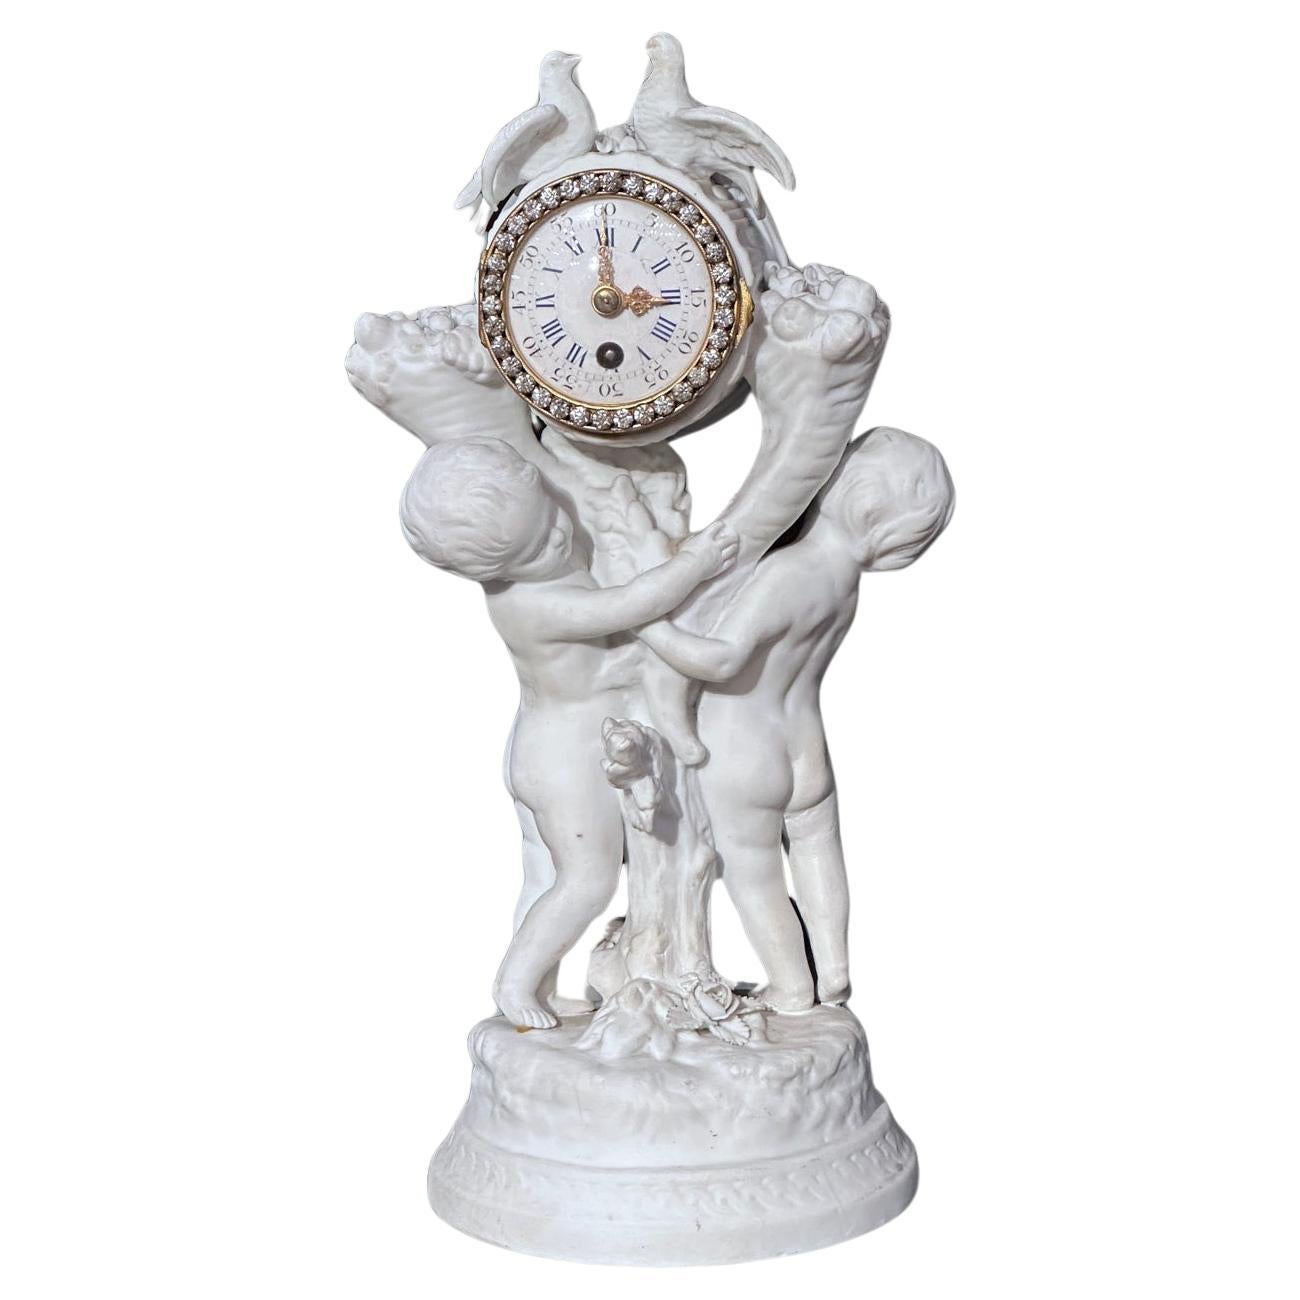 EARLY 19th CENTURY FRENCH PORCELAIN CLOCK  For Sale